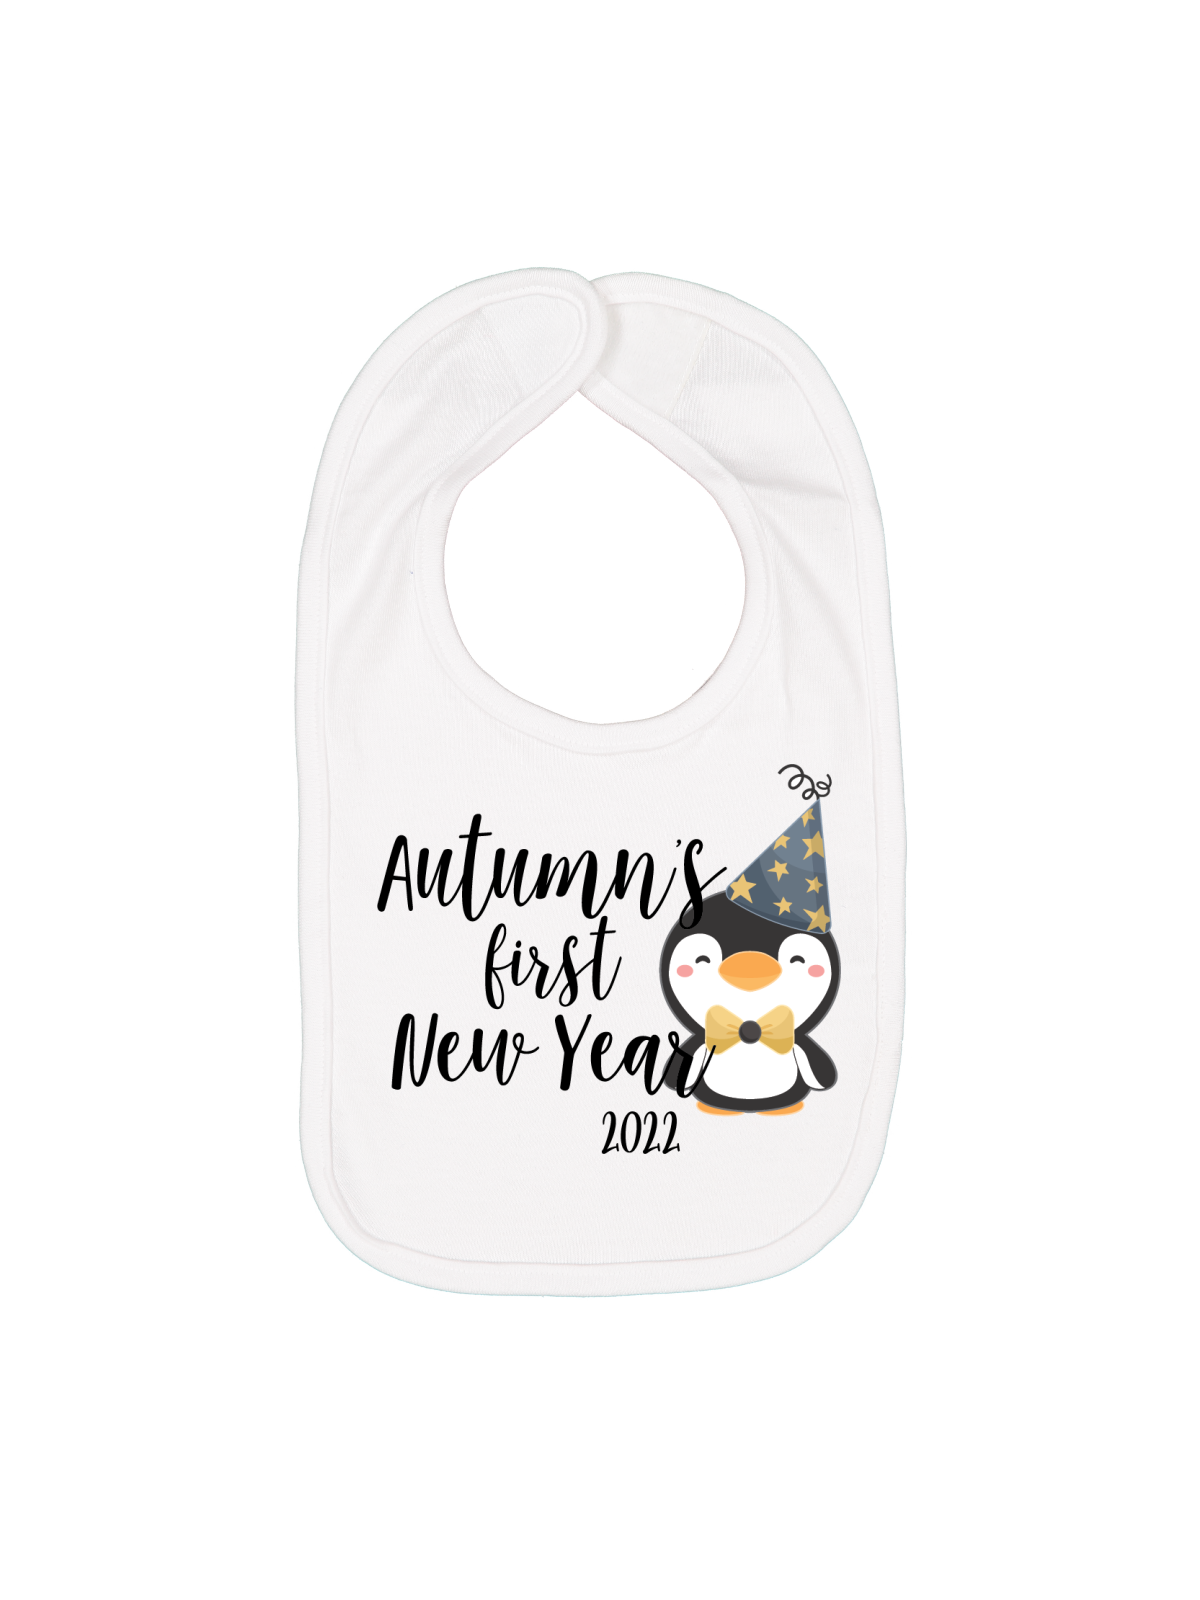 Personalized First New Year's Baby Bib - White